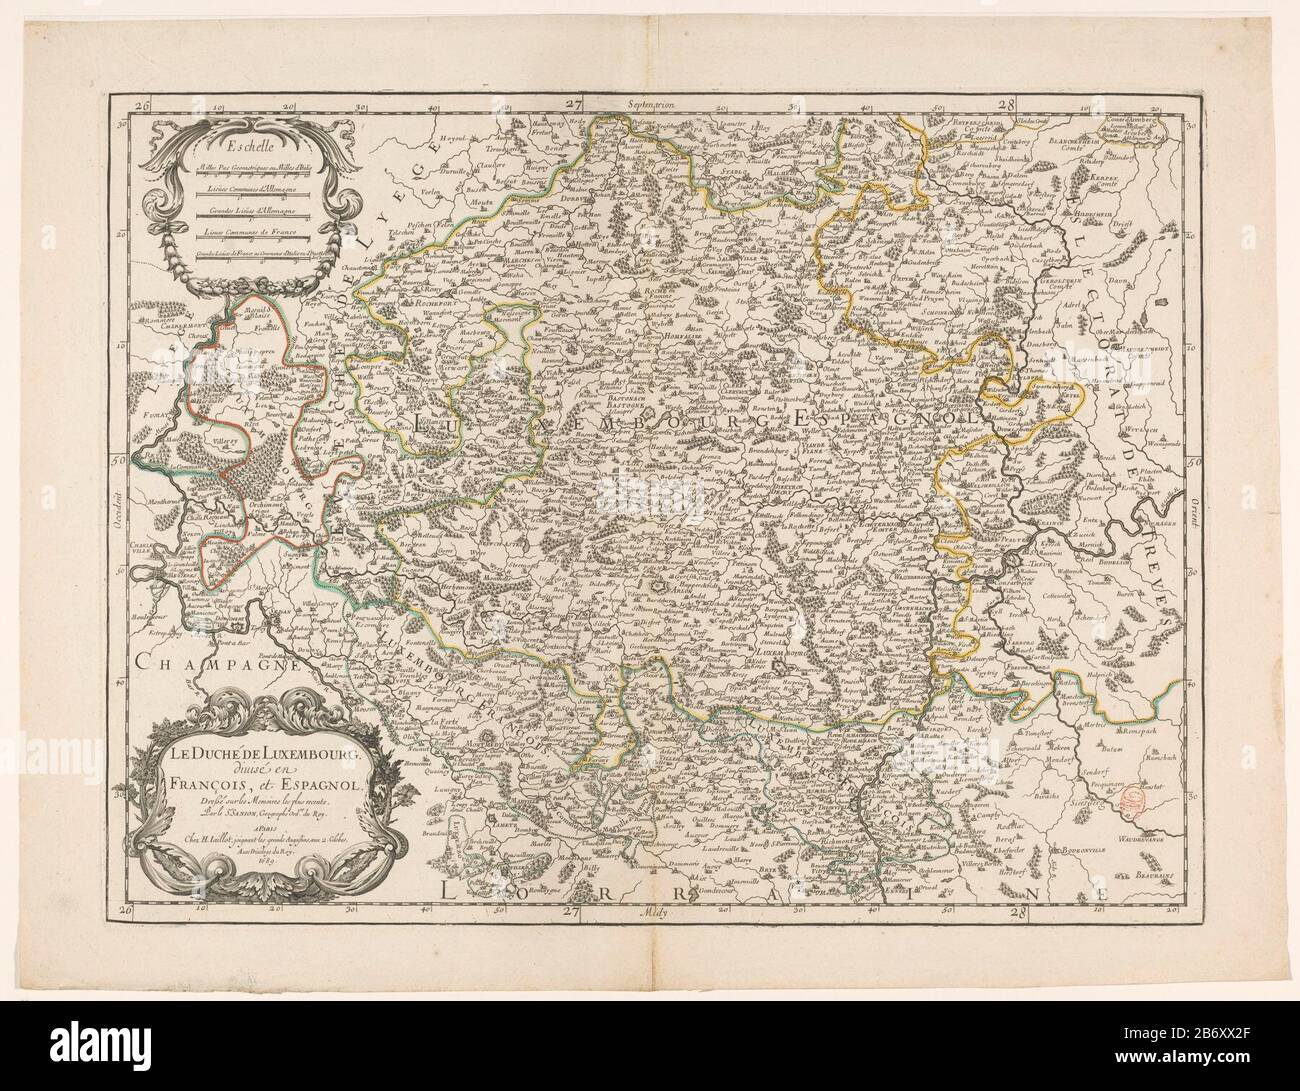 Map of the Duchy of Luxembourg. Links Under the title cartouche. Top left a  cartouche with five poles scale: 10 Milles Milles Only Geometriques ou  d'Italie / 2 lieues Communes d'Allemagne /